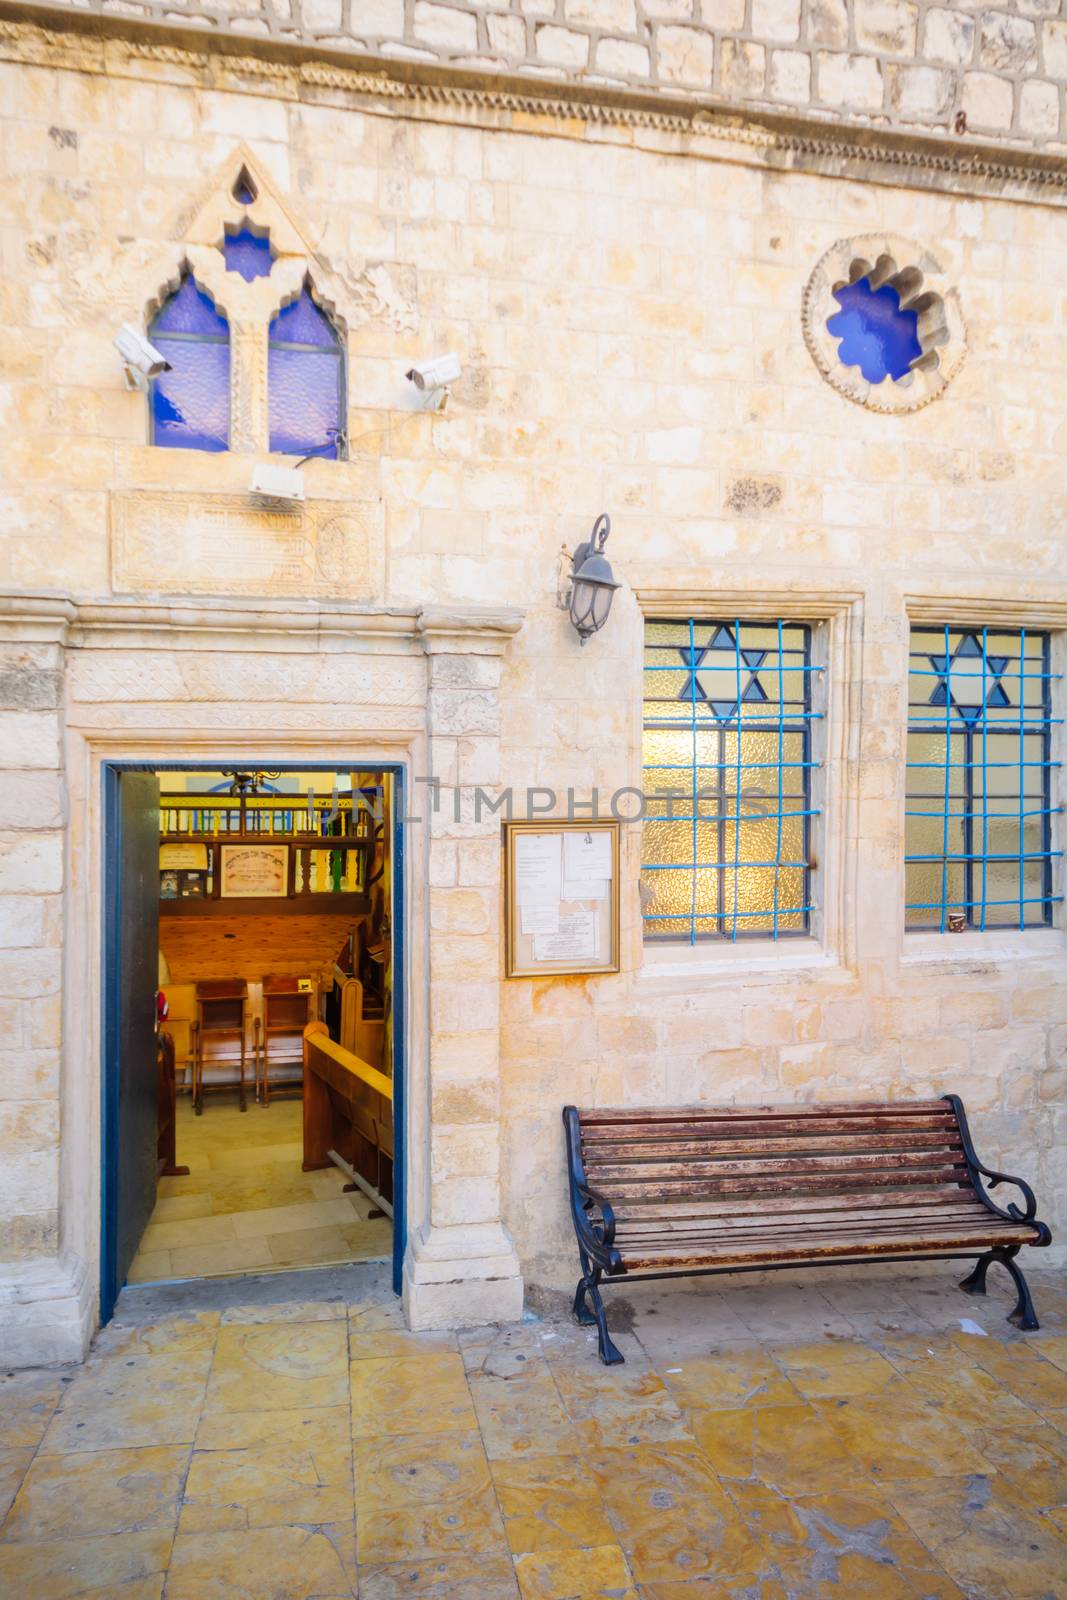 The Ashkenazi HaAri Synagogue, in the Jewish quarter, Safed (Tzf by RnDmS